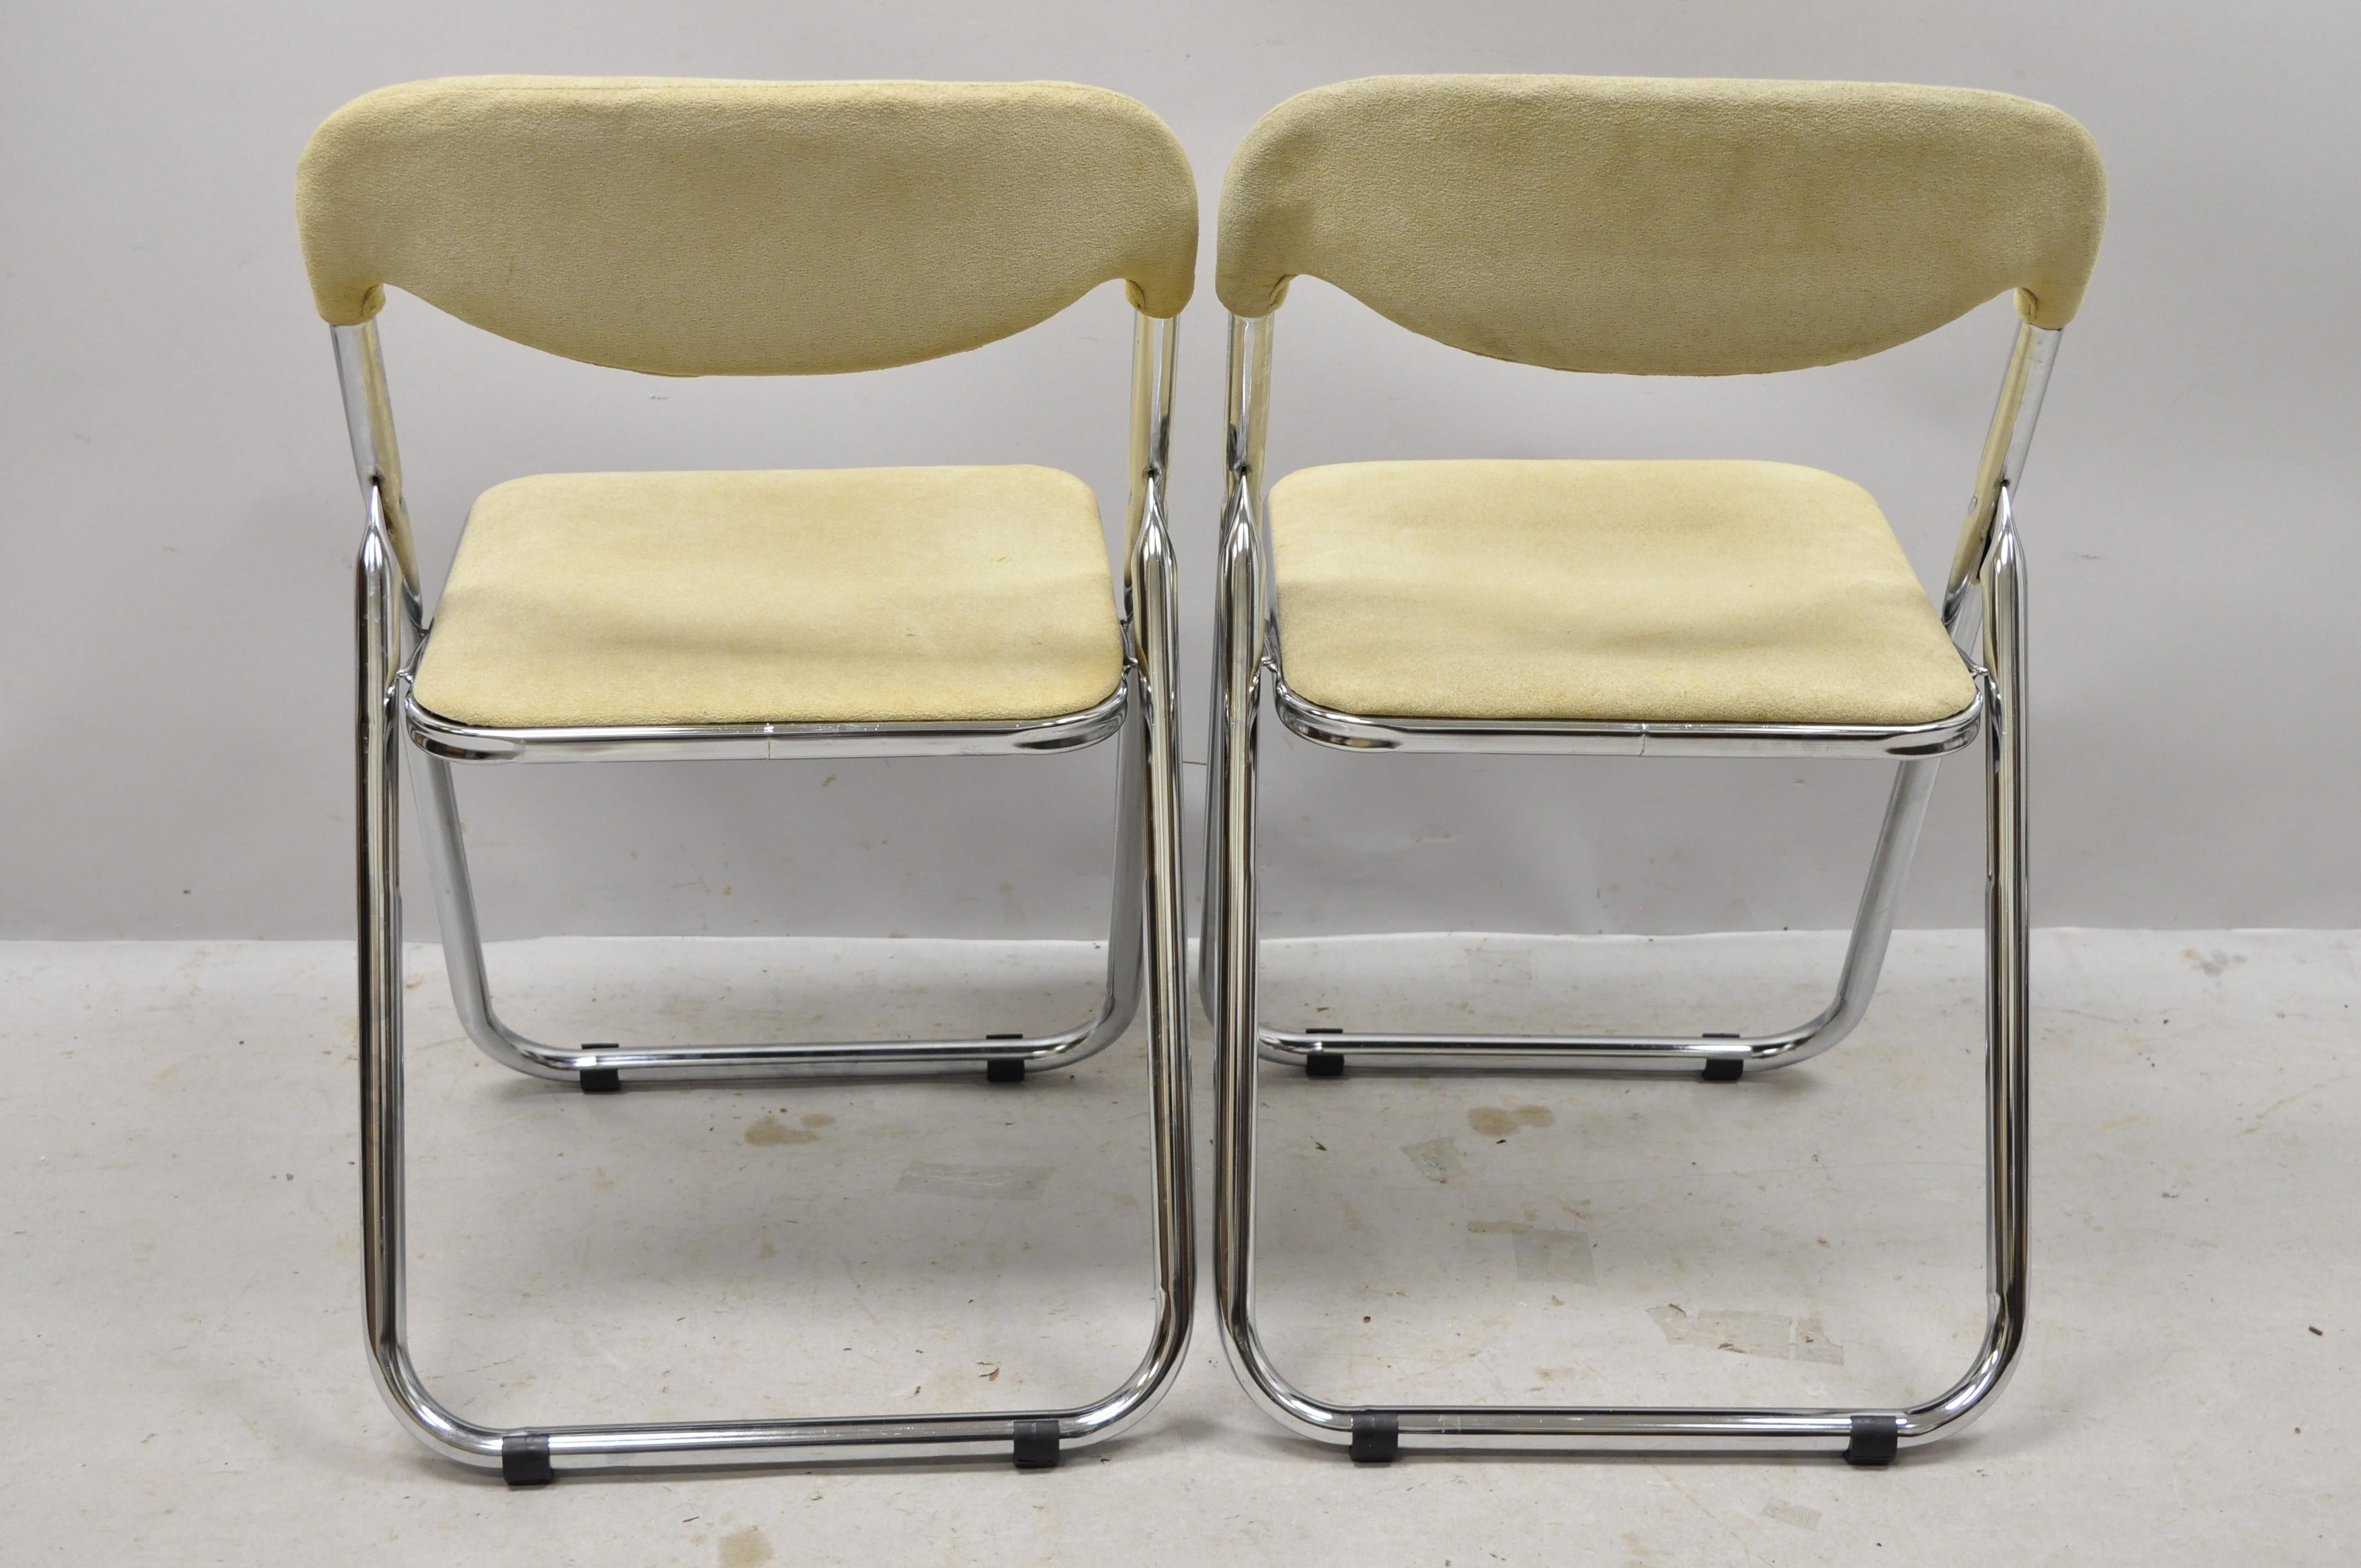 Vintage Italian Midcentury Chrome Upholstered Folding Game Chairs, Set of 4 For Sale 2